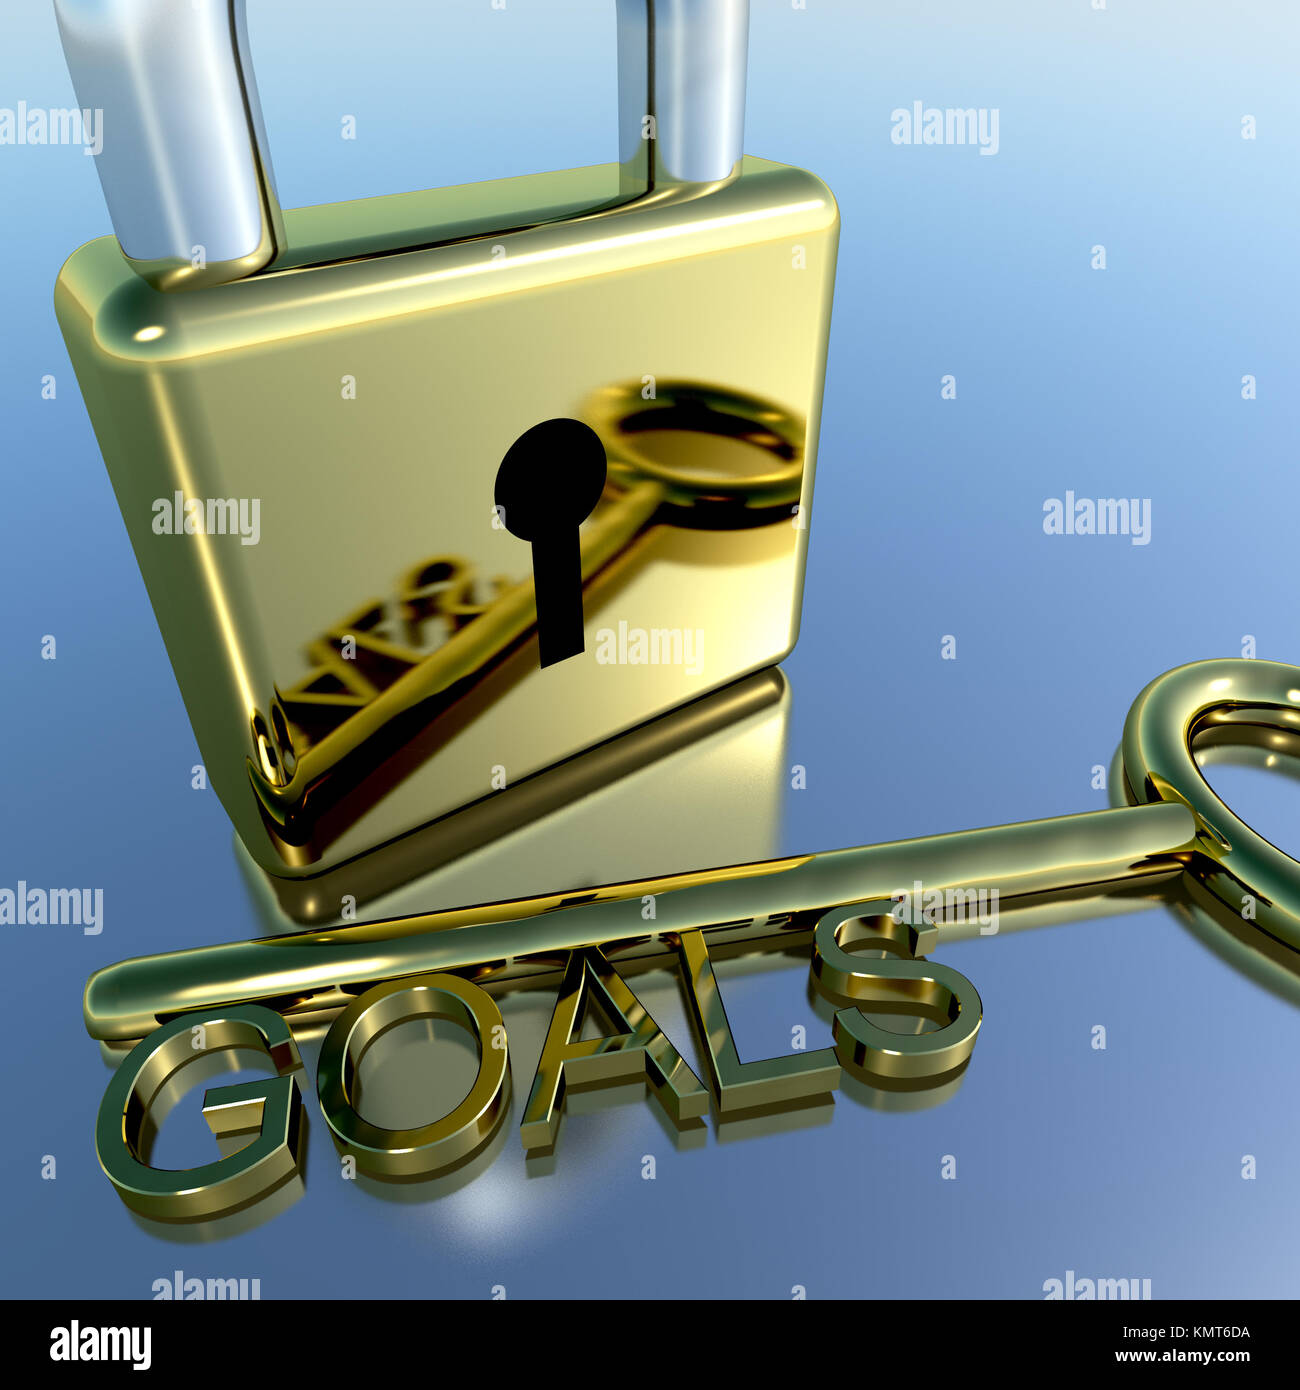 Padlock With Goals Key Showing Objectives Hopes And Future Stock Photo